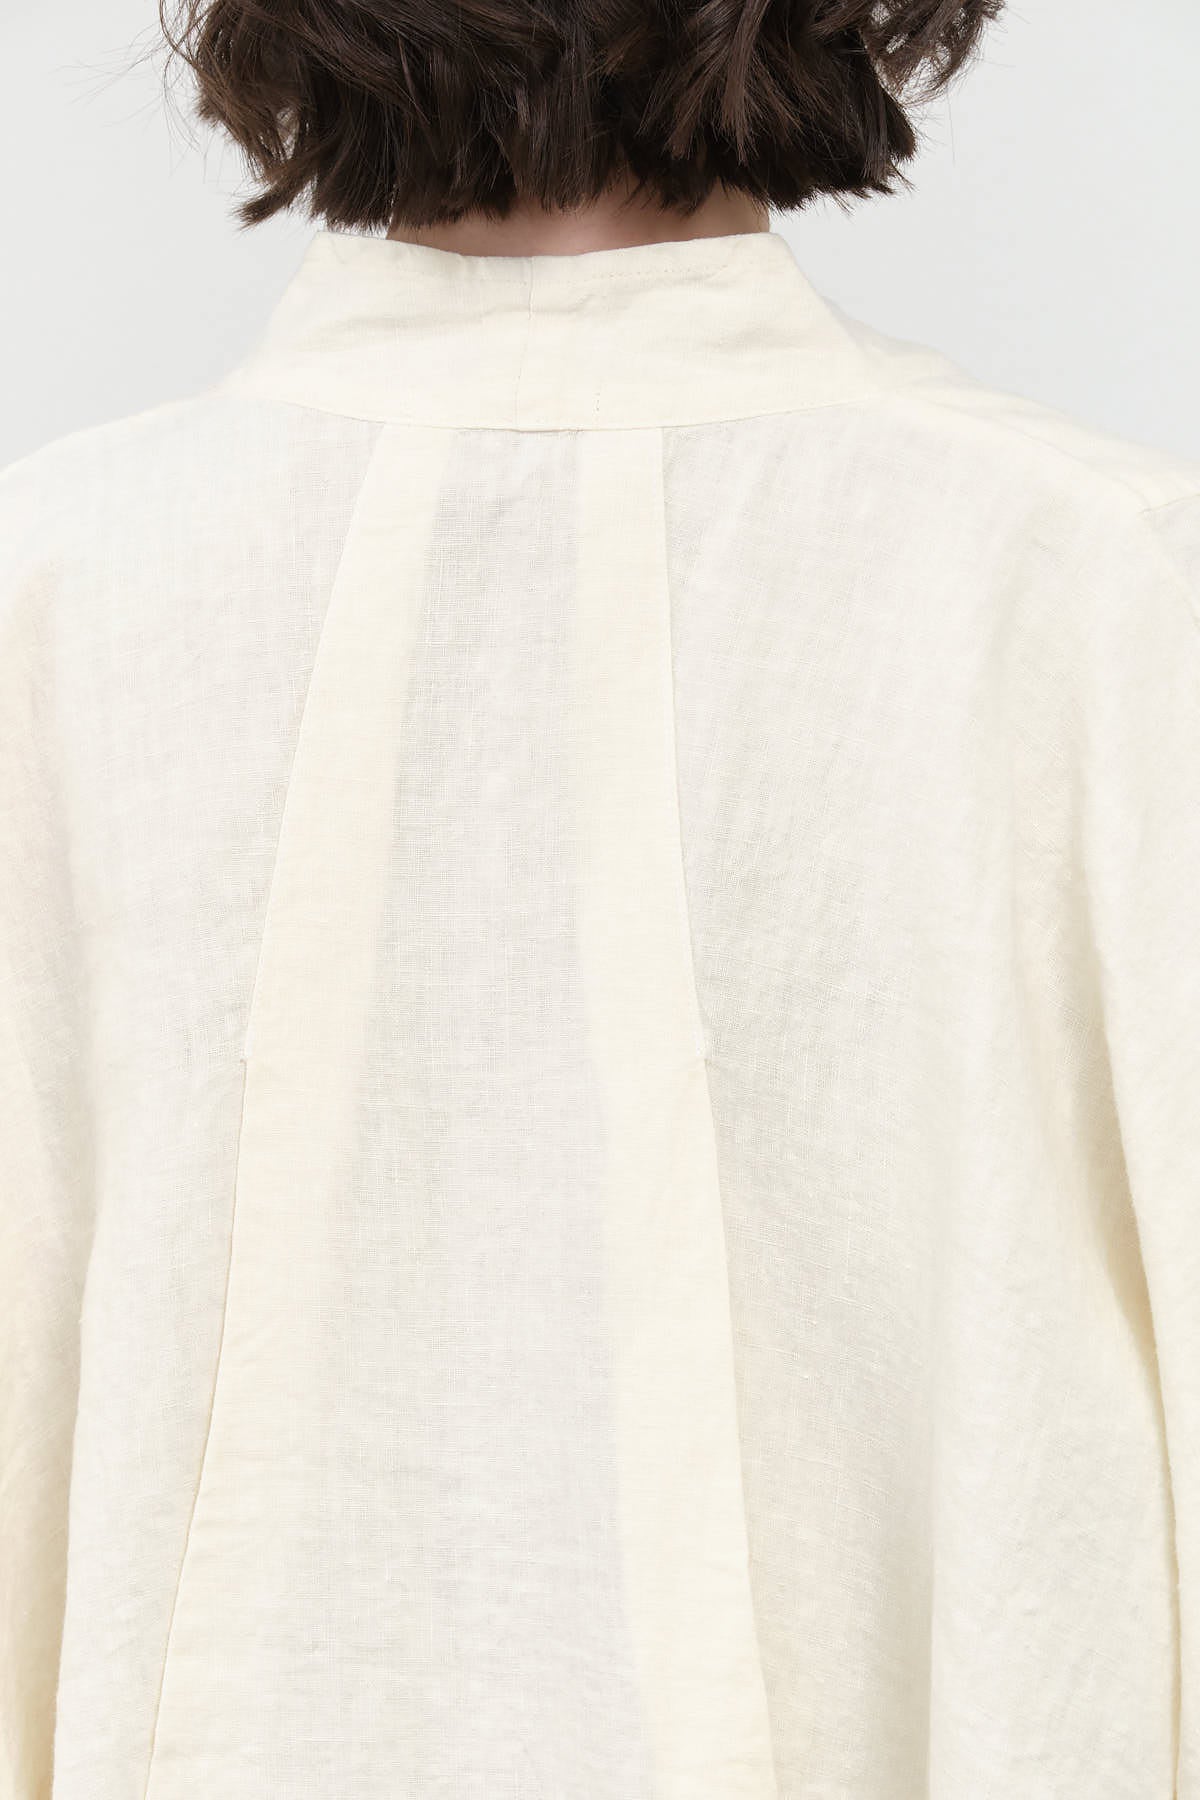 Back collar view of Spoon Jacket in Cream